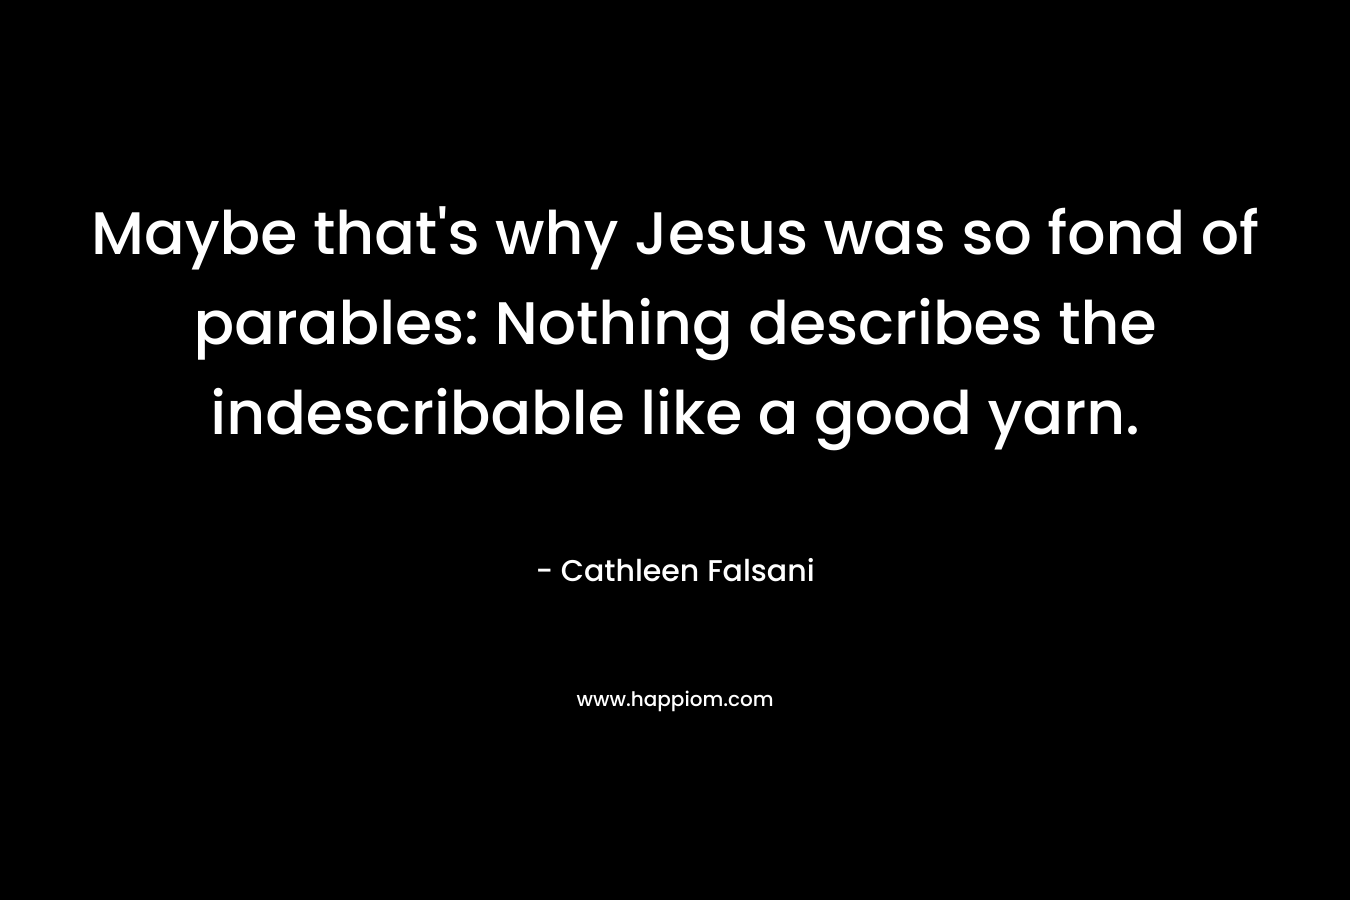 Maybe that’s why Jesus was so fond of parables: Nothing describes the indescribable like a good yarn. – Cathleen Falsani